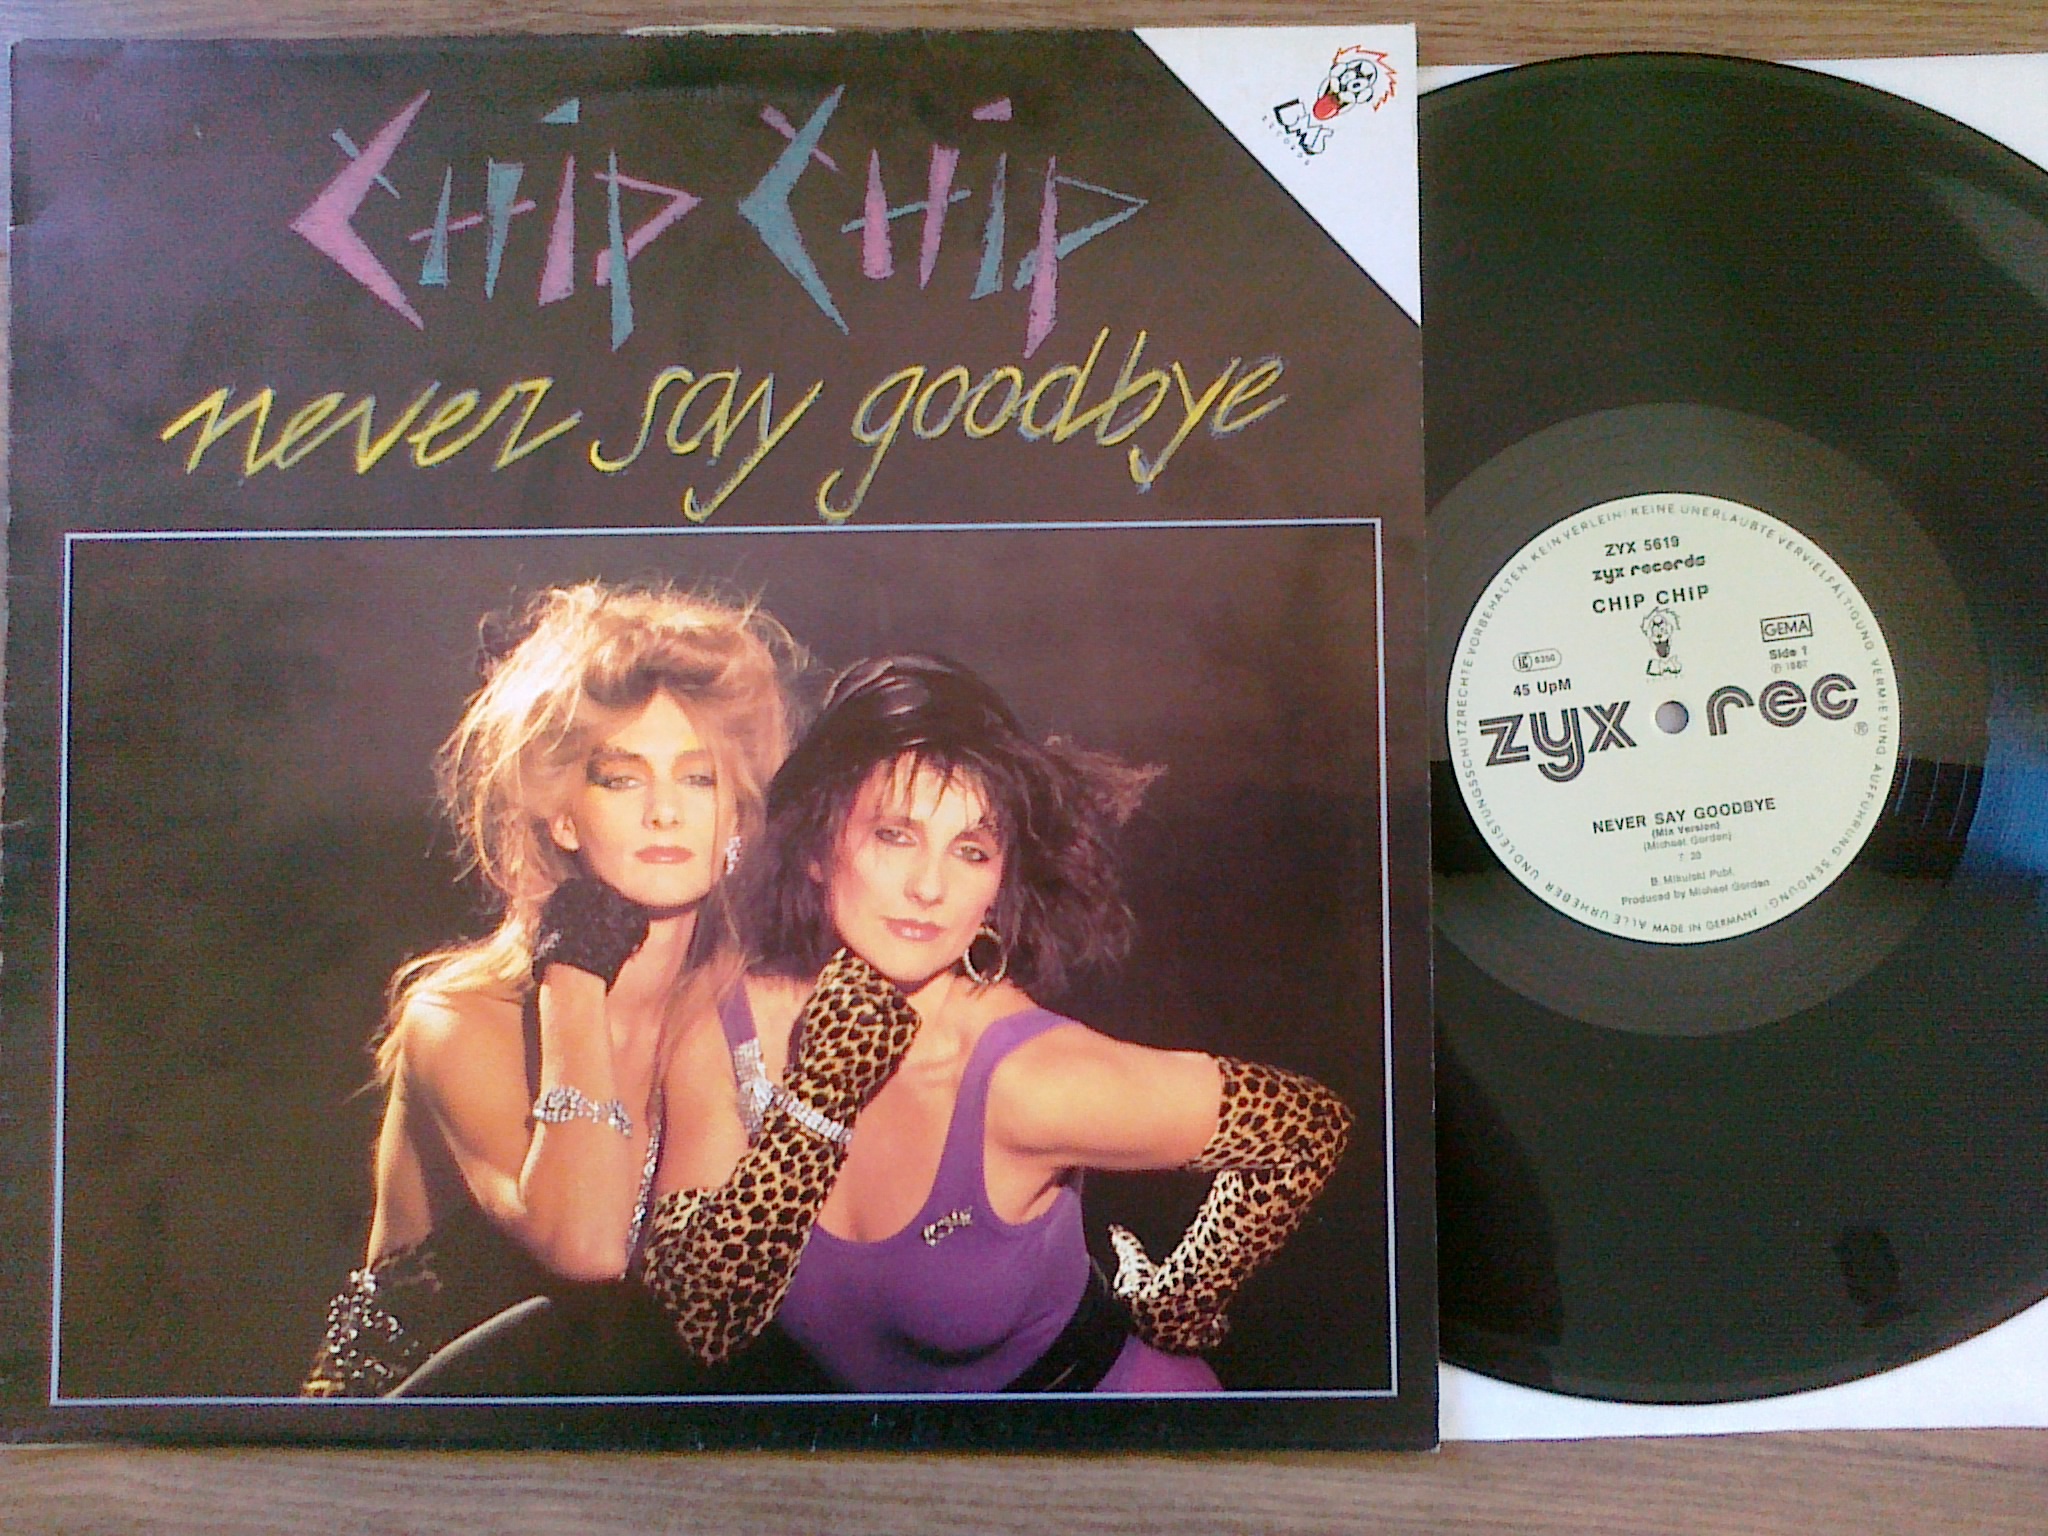 Chip Chip - Never Say Goodbye